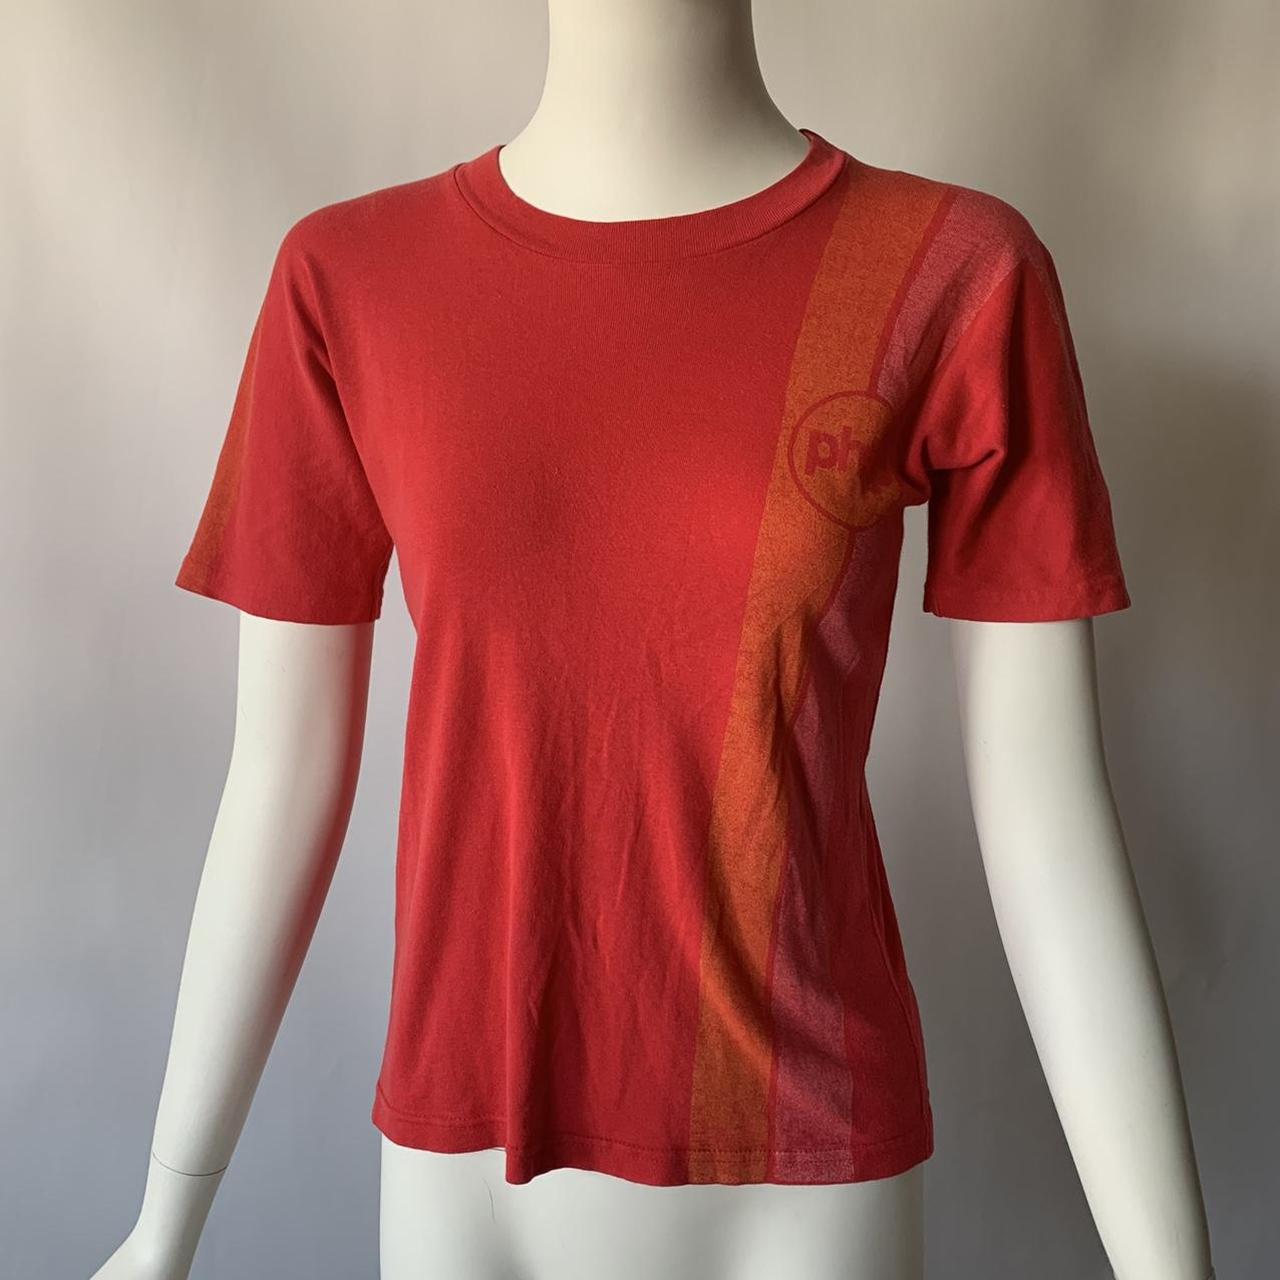 Product Image 1 - Red-orange-pink tshirt from phtp (people-have-the-power)